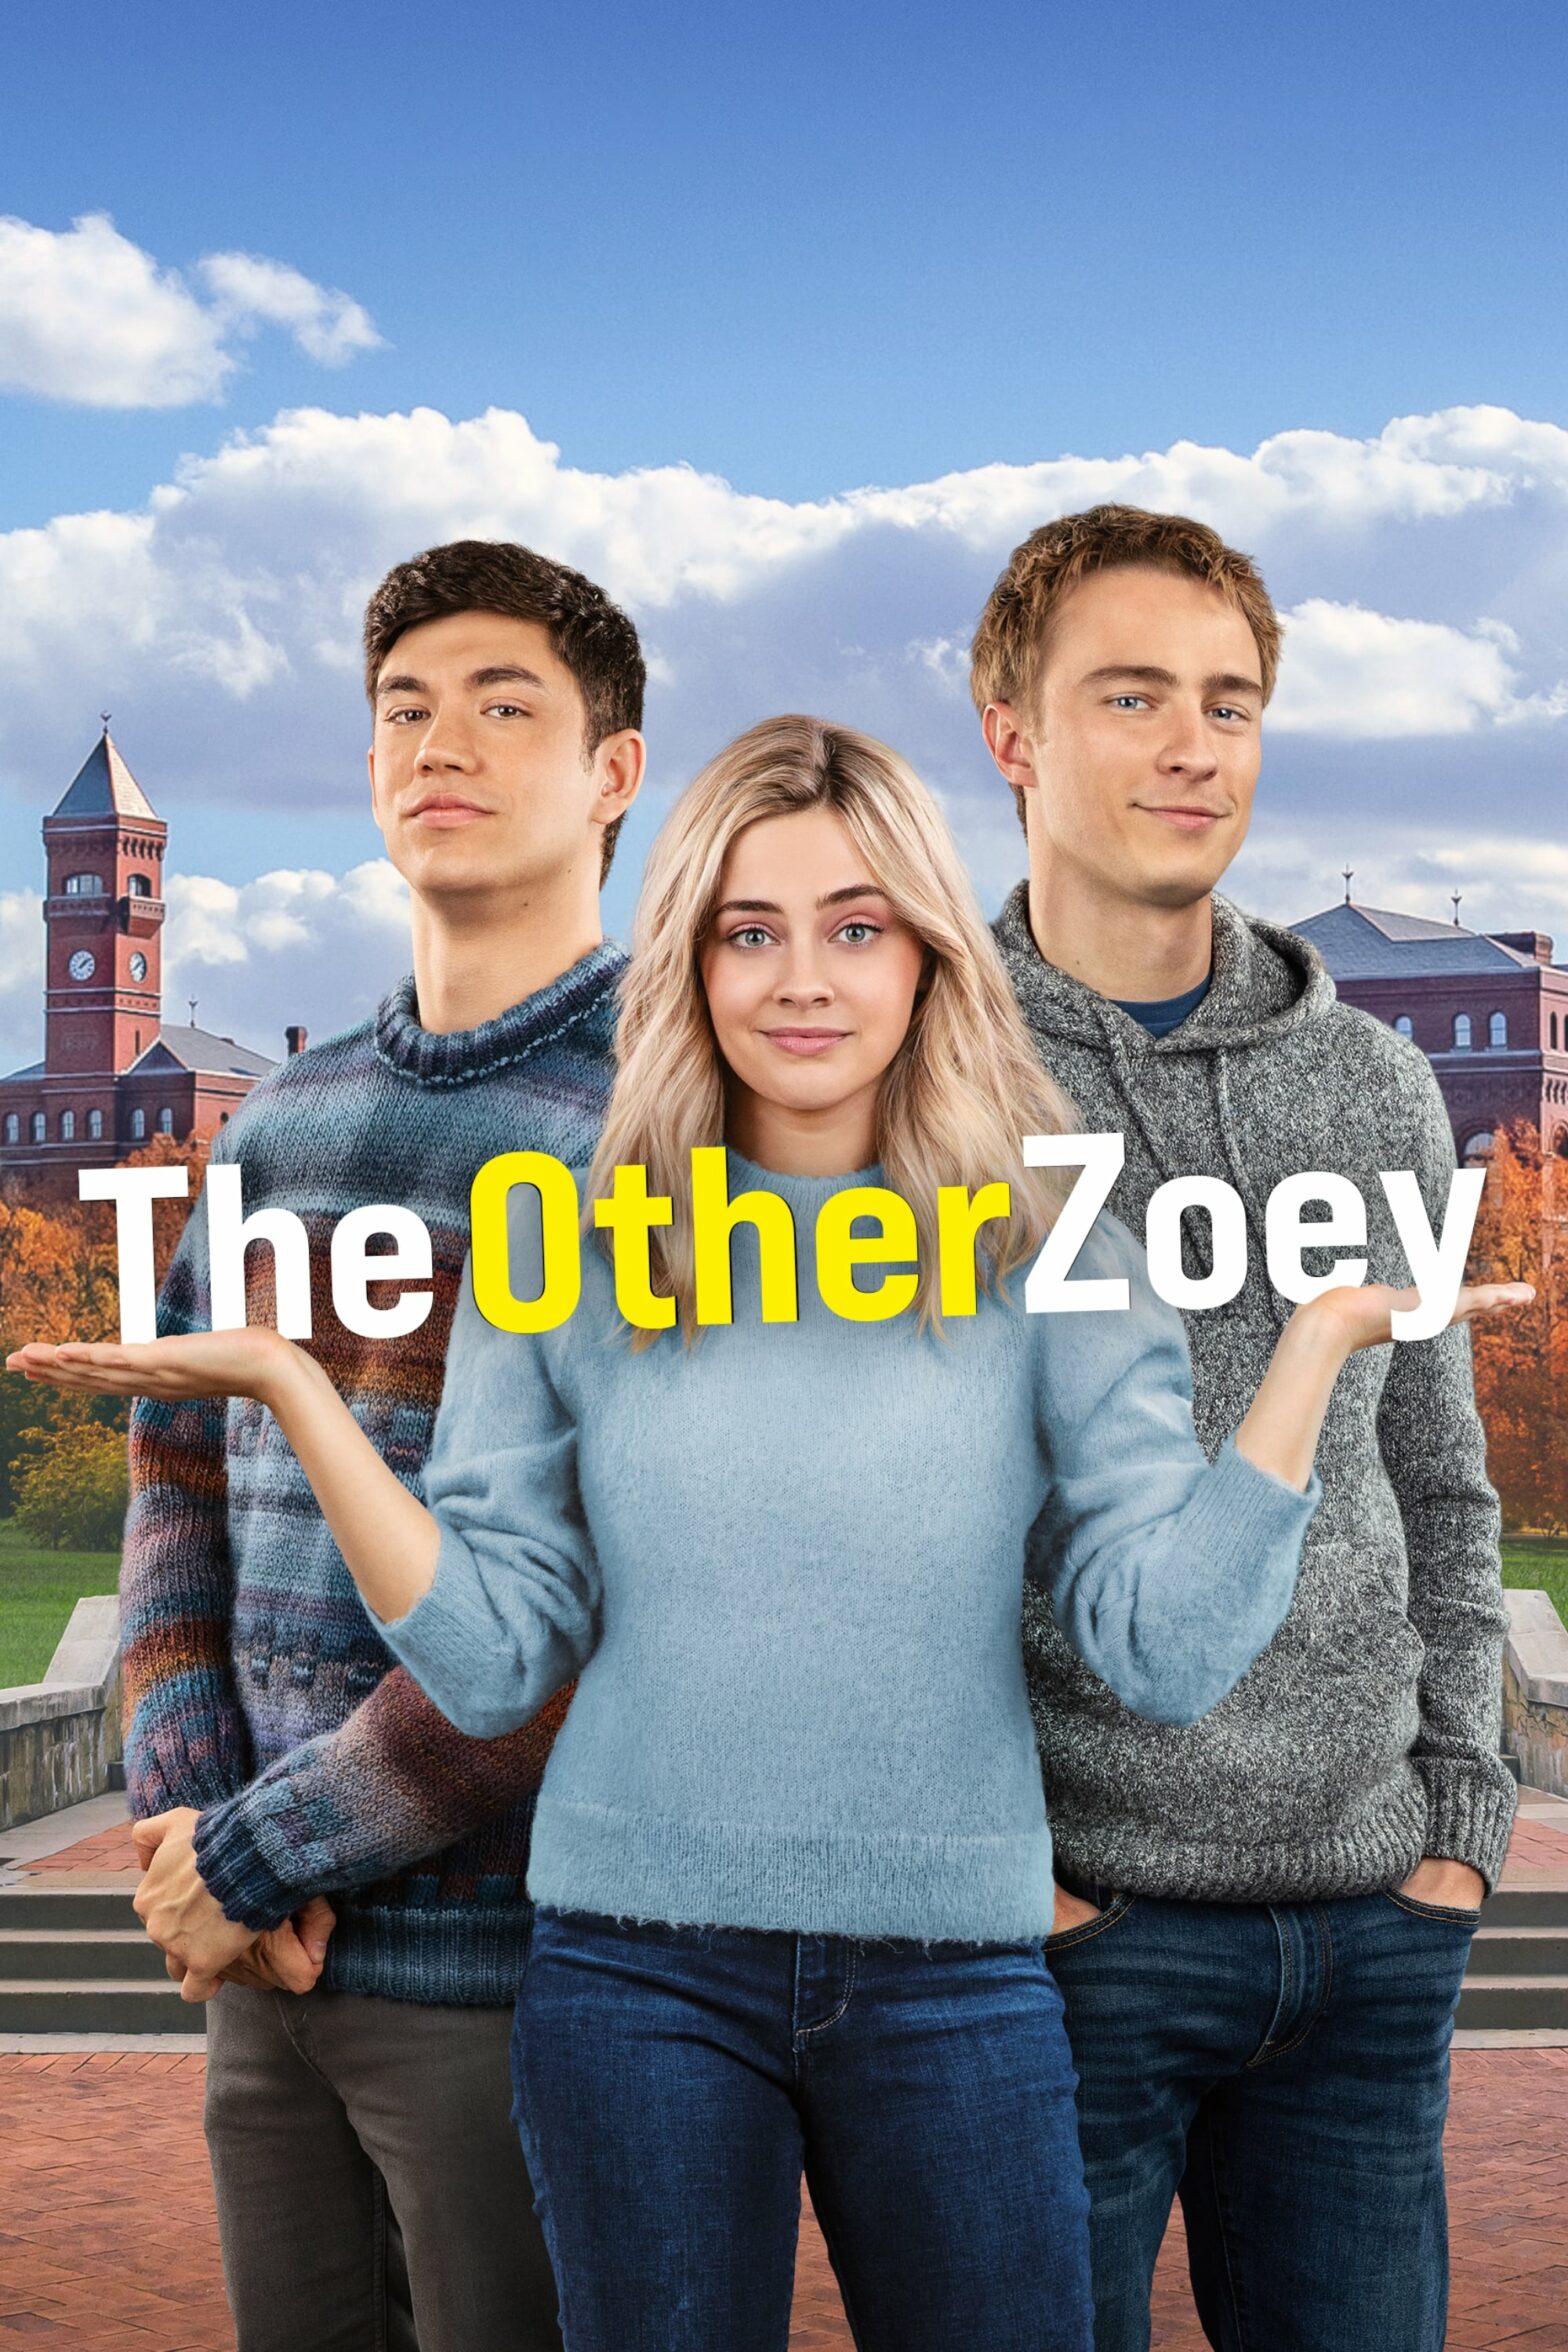 Poster for the movie "The Other Zoey"